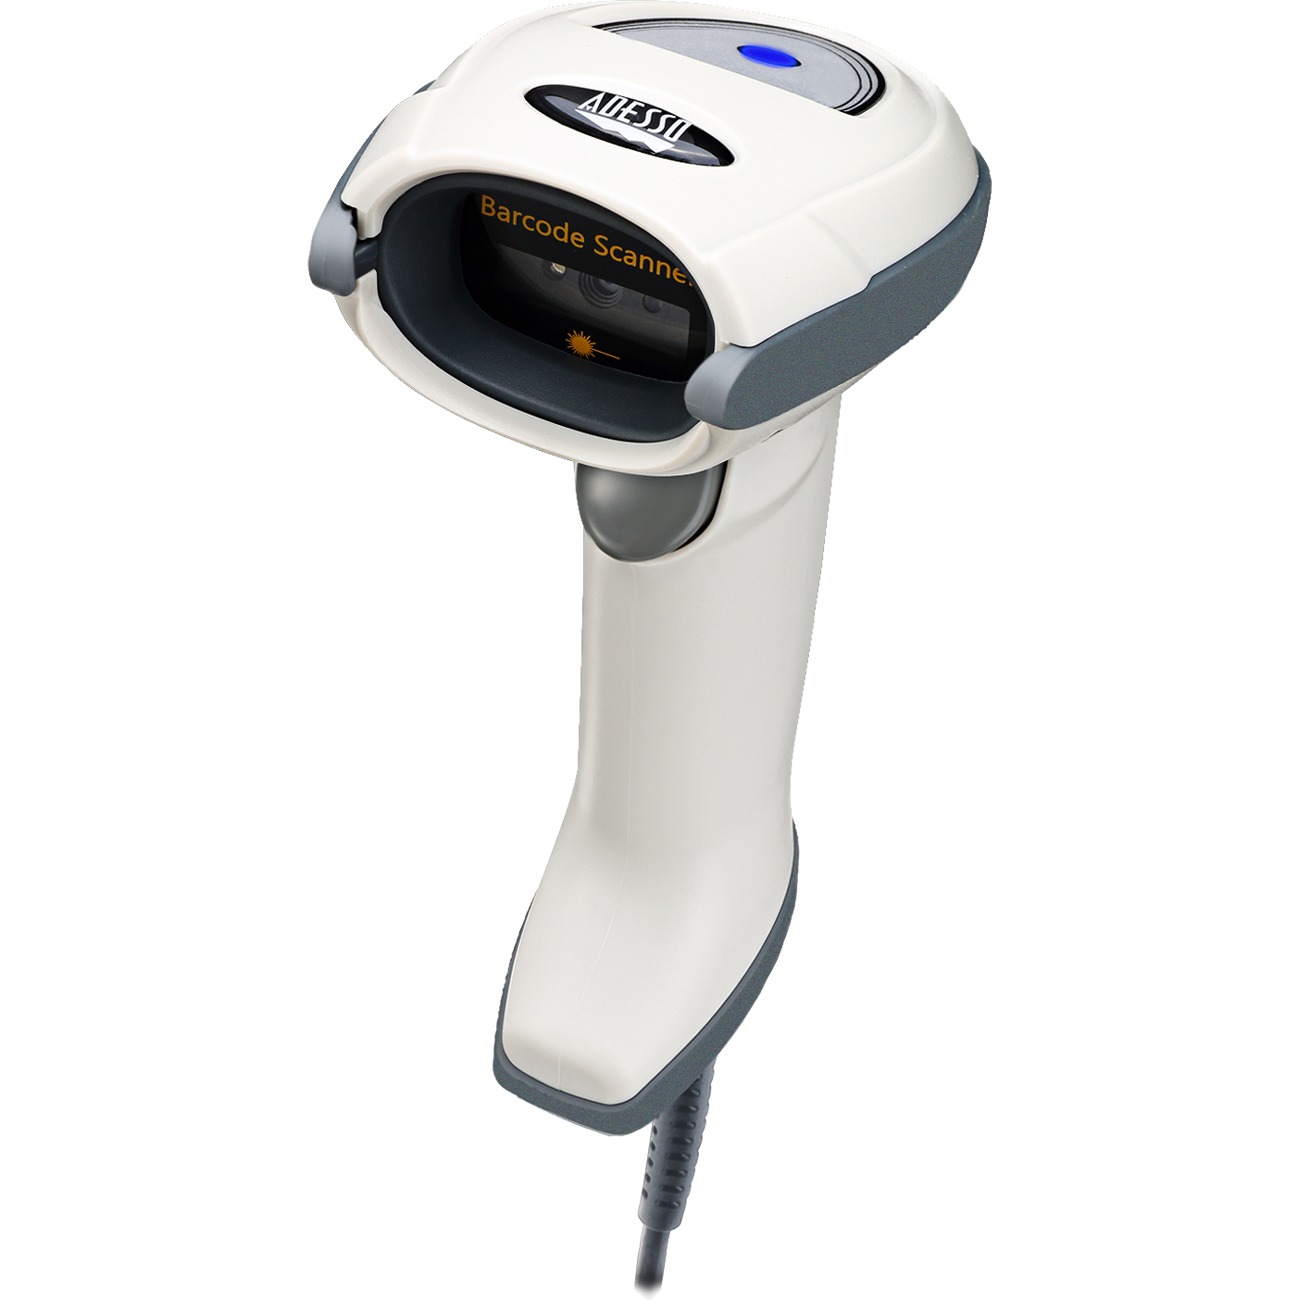 Adesso NuScan 7600TU-W 2D Antimicrobial Handheld Barcode Scanner - White - image 2 of 5